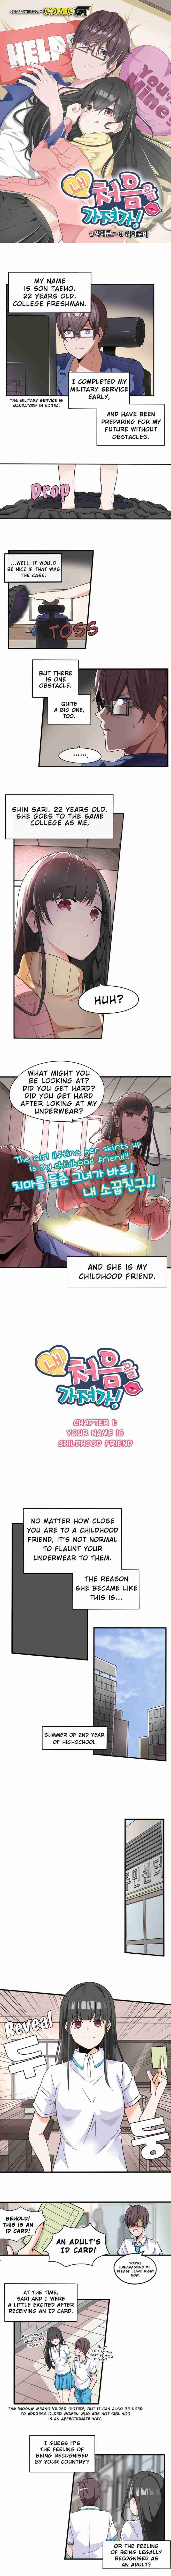 Take My First Time! Ch. 1 Your Name Is Childhood Friend